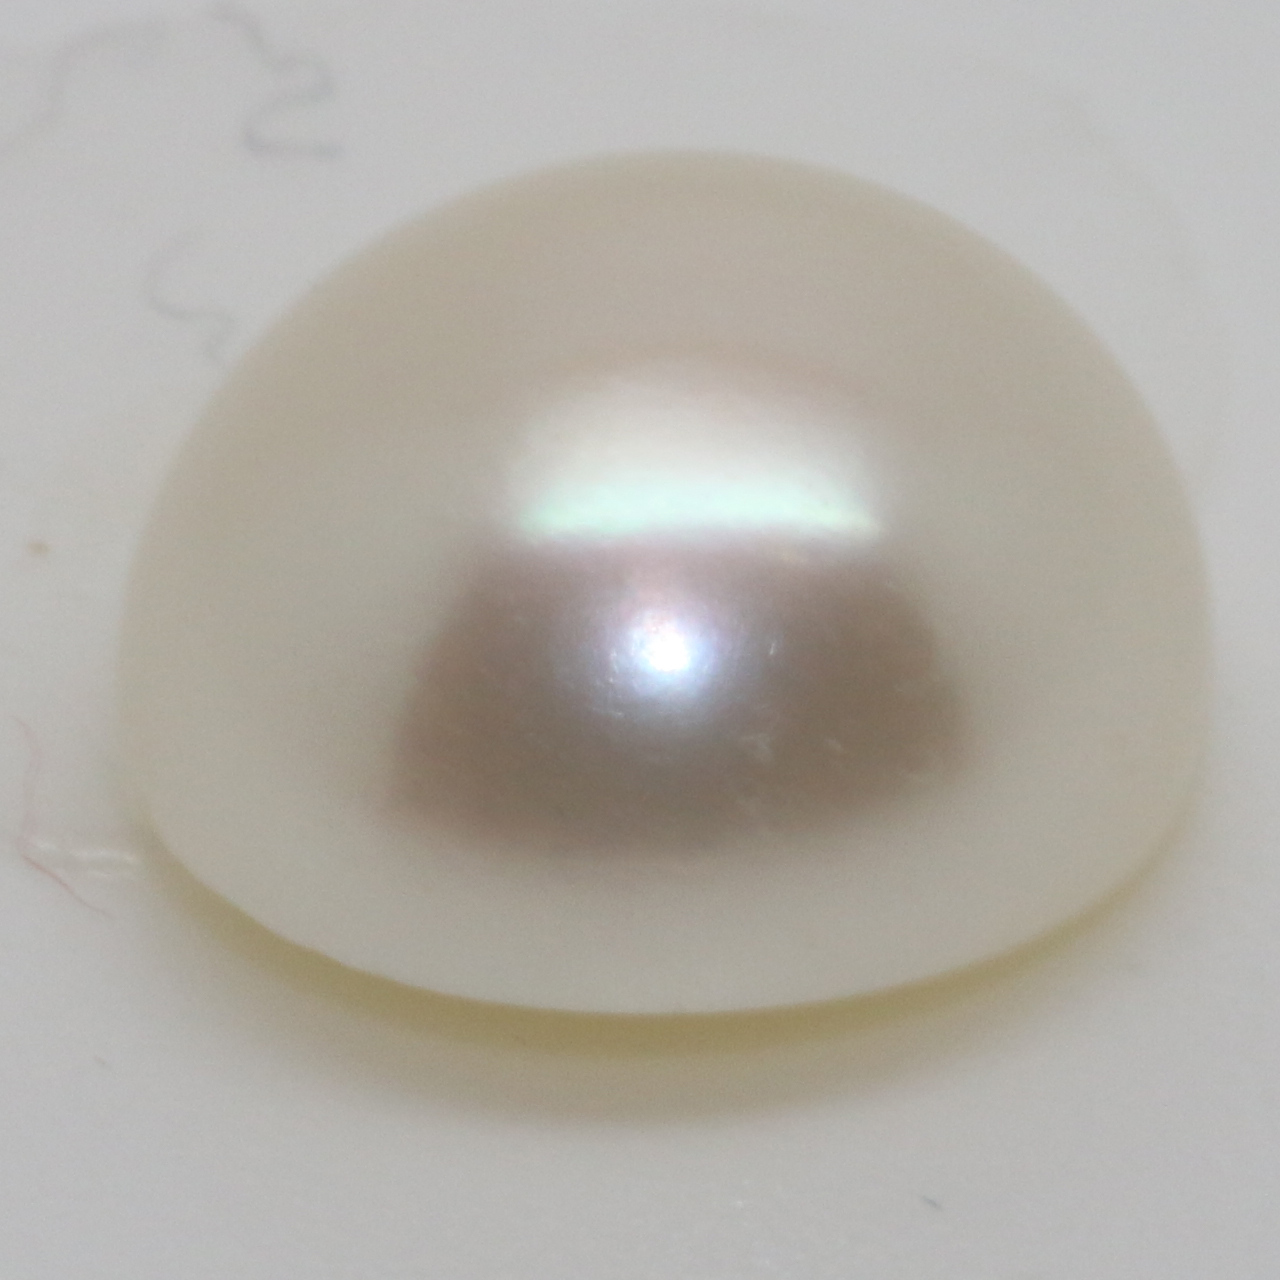 7MM ROUND PASTE PEARLS CABOCHON